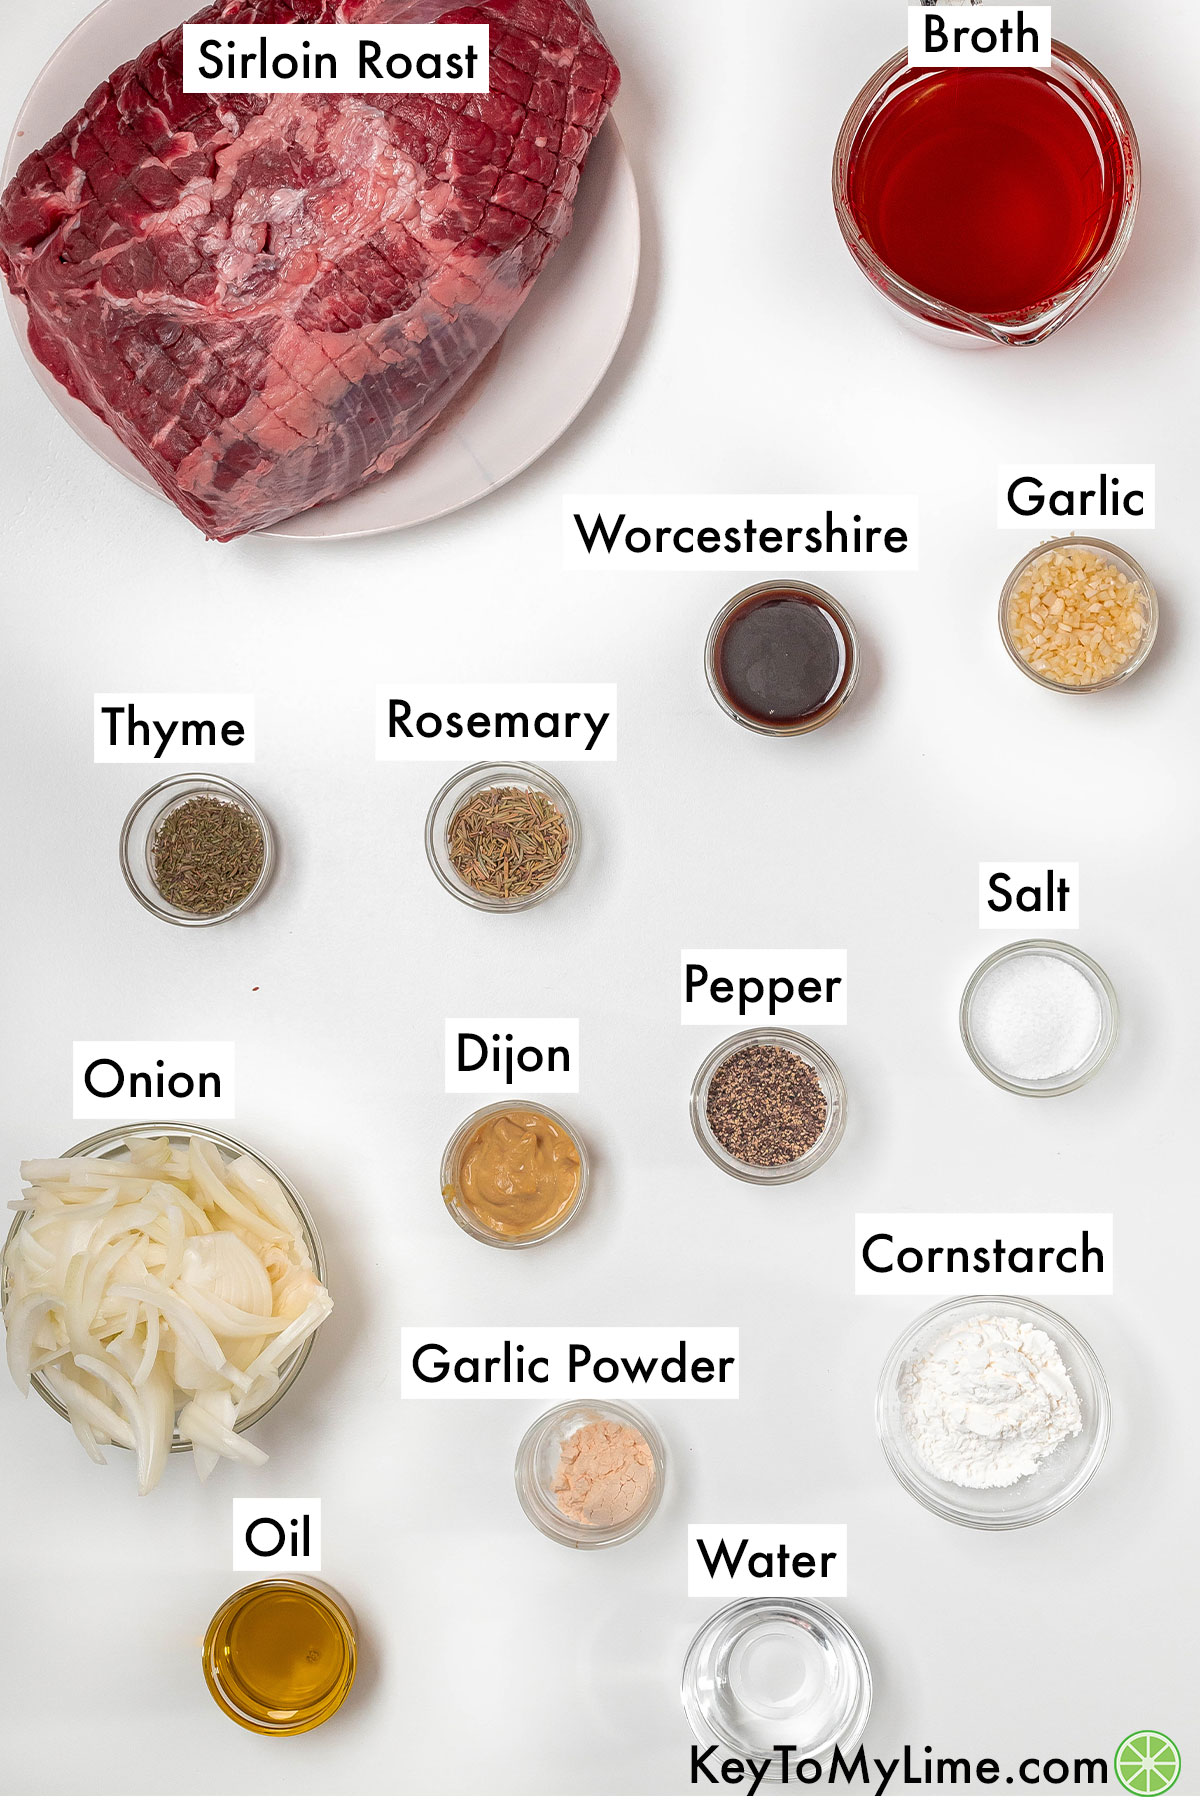 The labeled ingredients for Instant Pot roast beef.